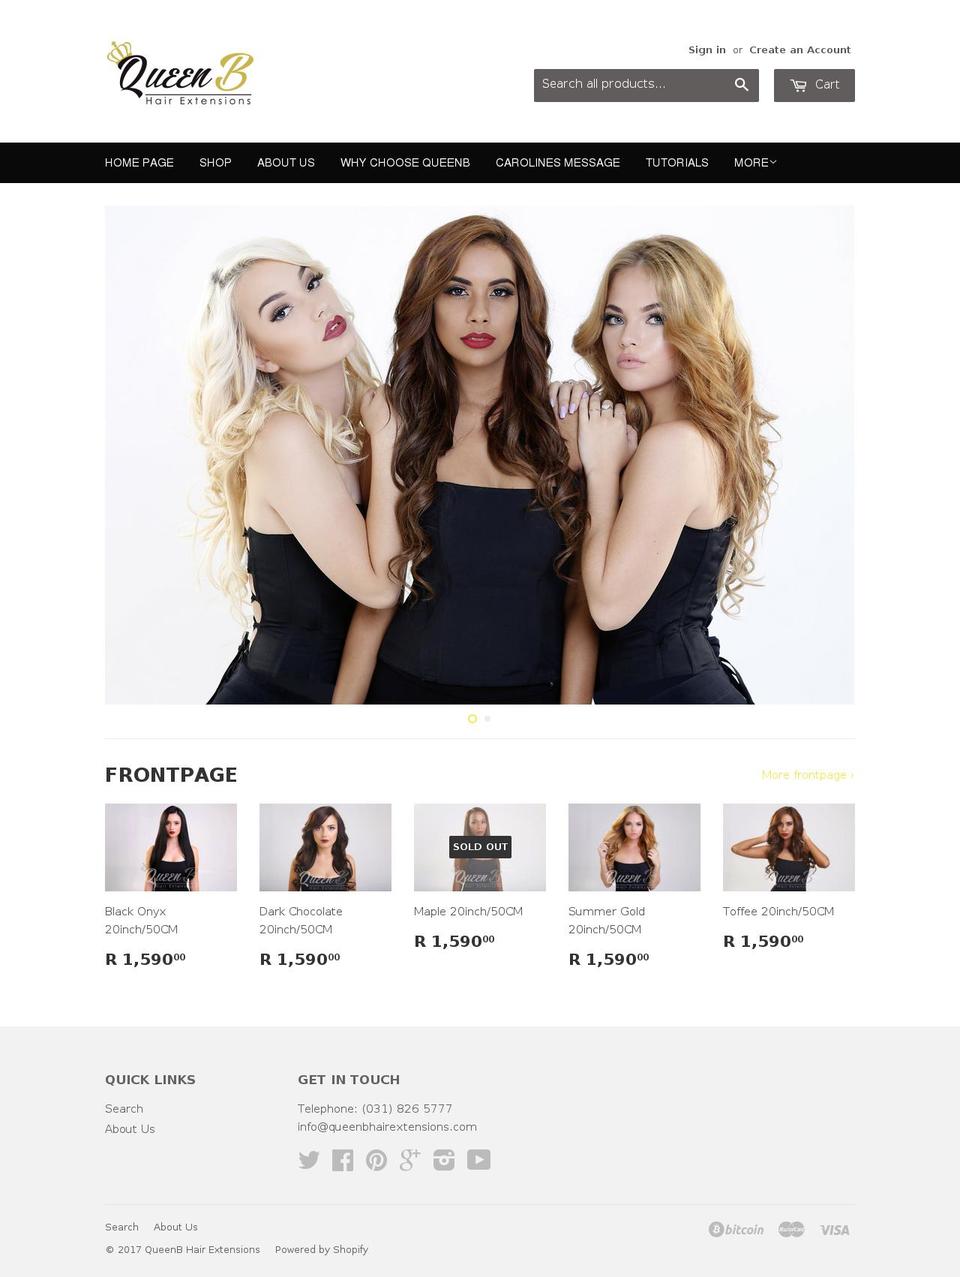 Trademark Shopify theme site example queenbhairextensions.com